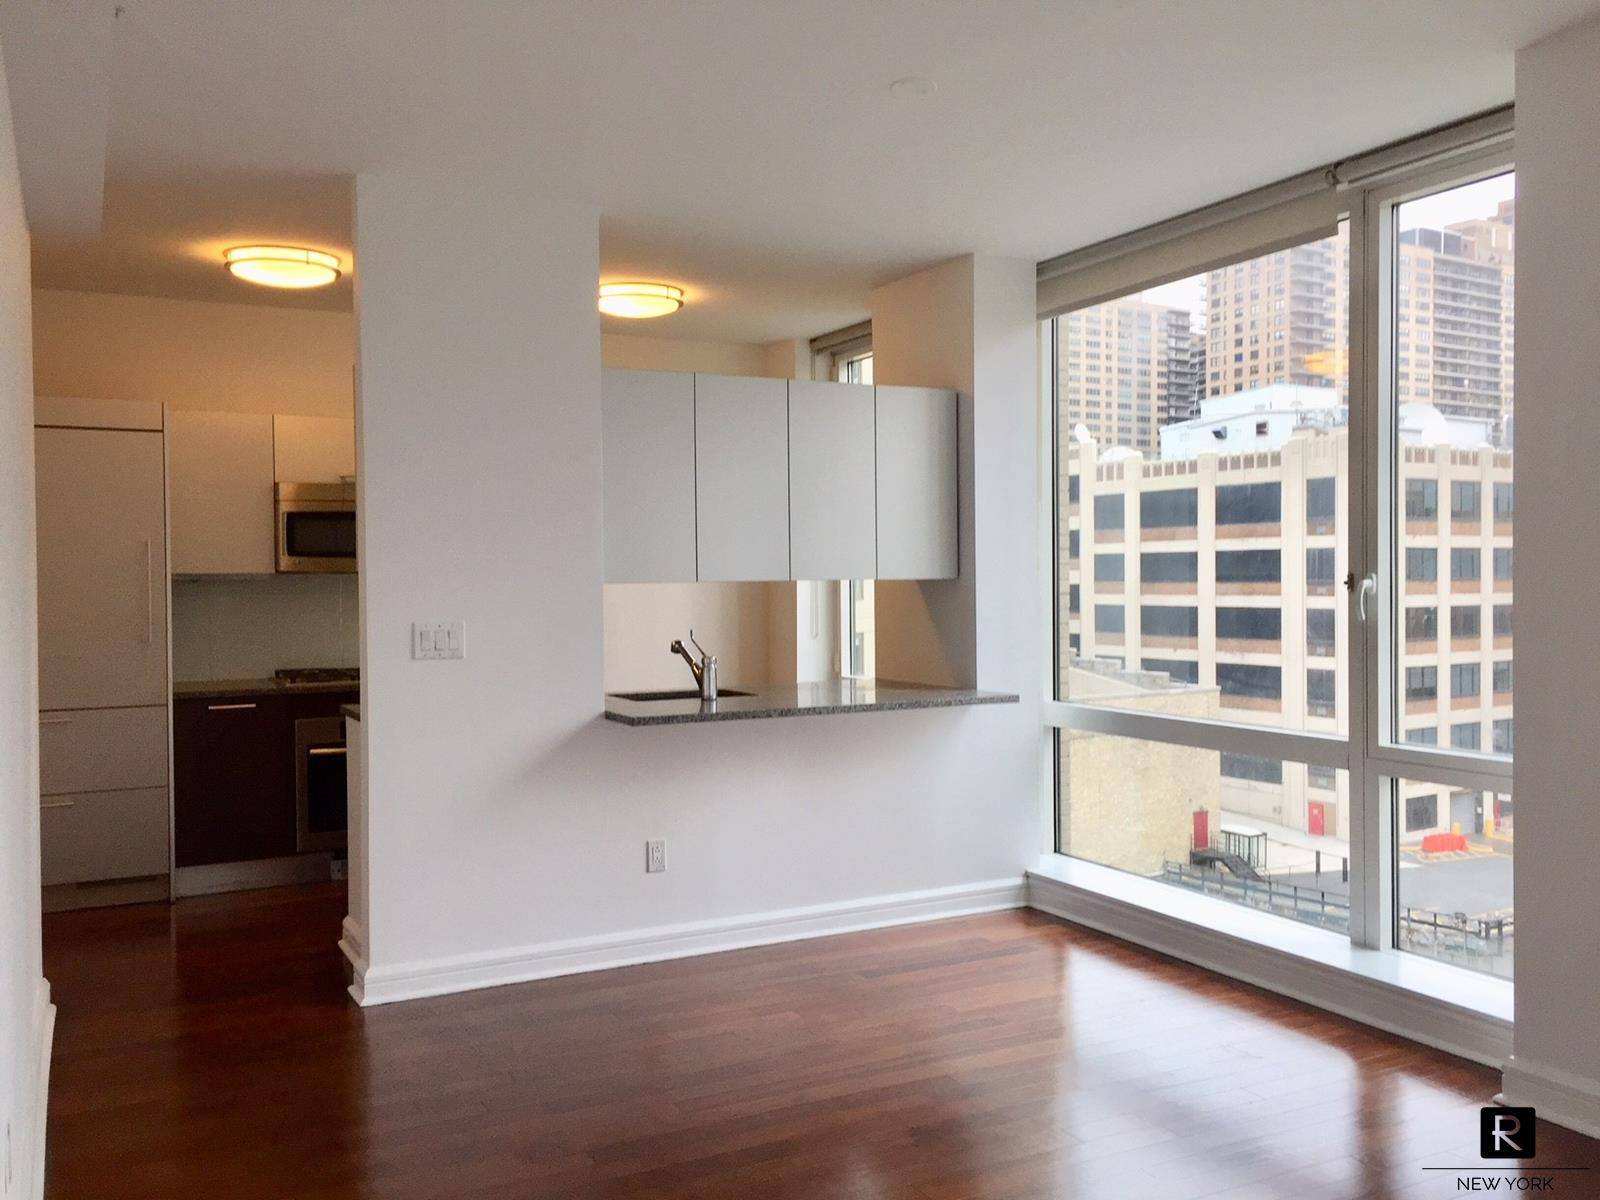 Spacious one bedroom apartment featuring generous closet space, floor to ceiling windows and hardwood floors throughout.